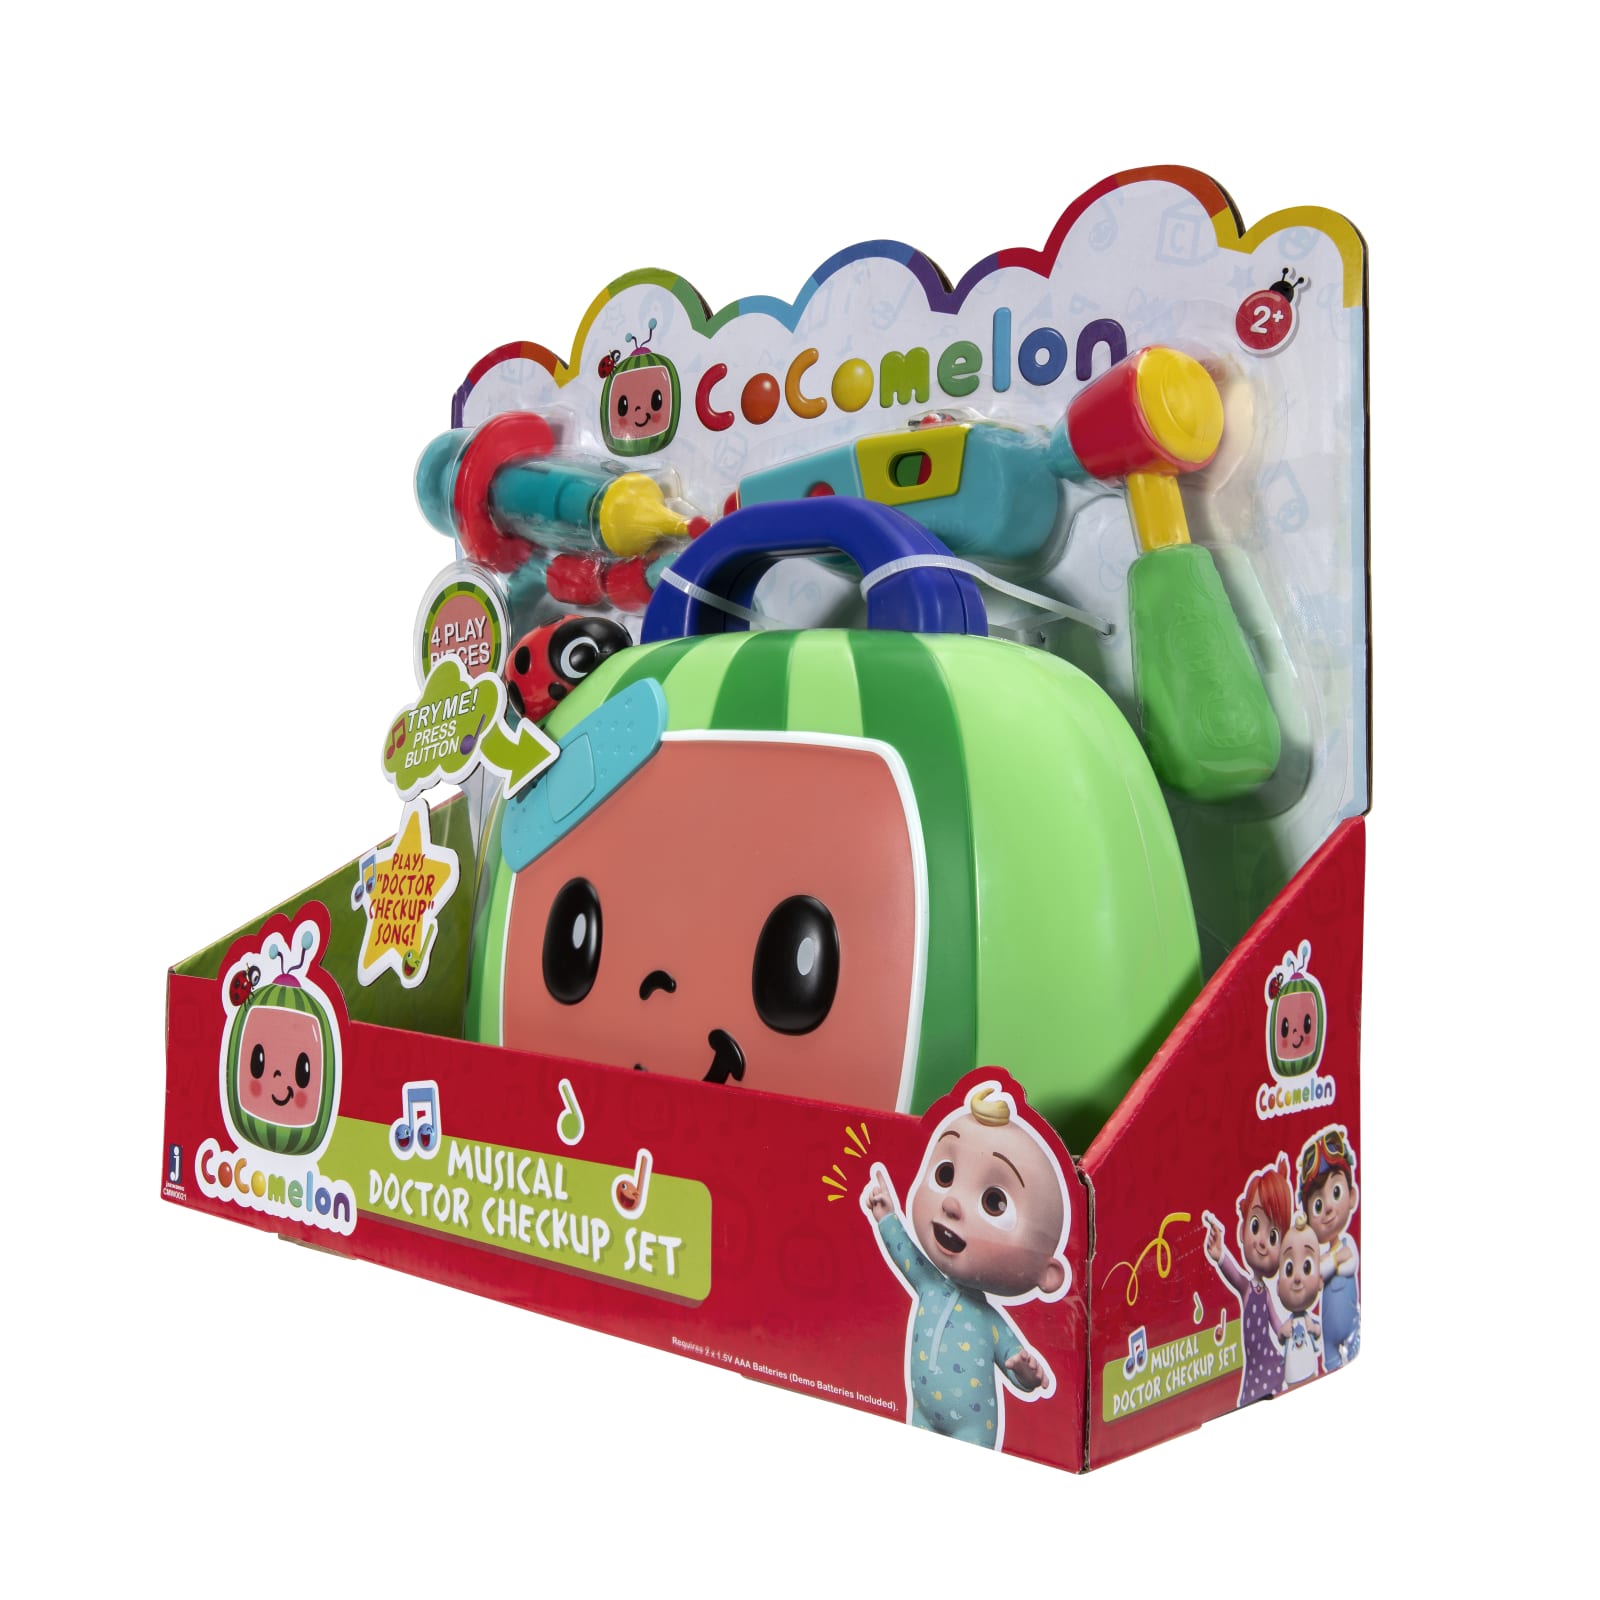 CoComelon Lunchbox Playset $10